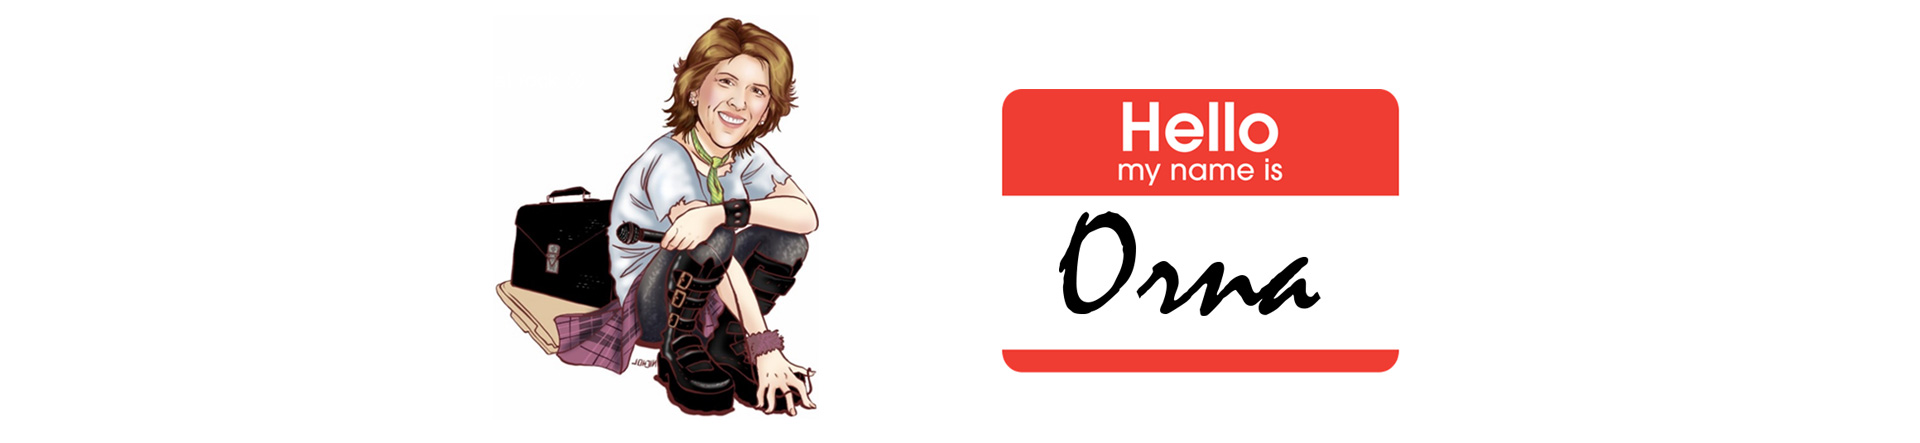 Hello, My name is Orna.